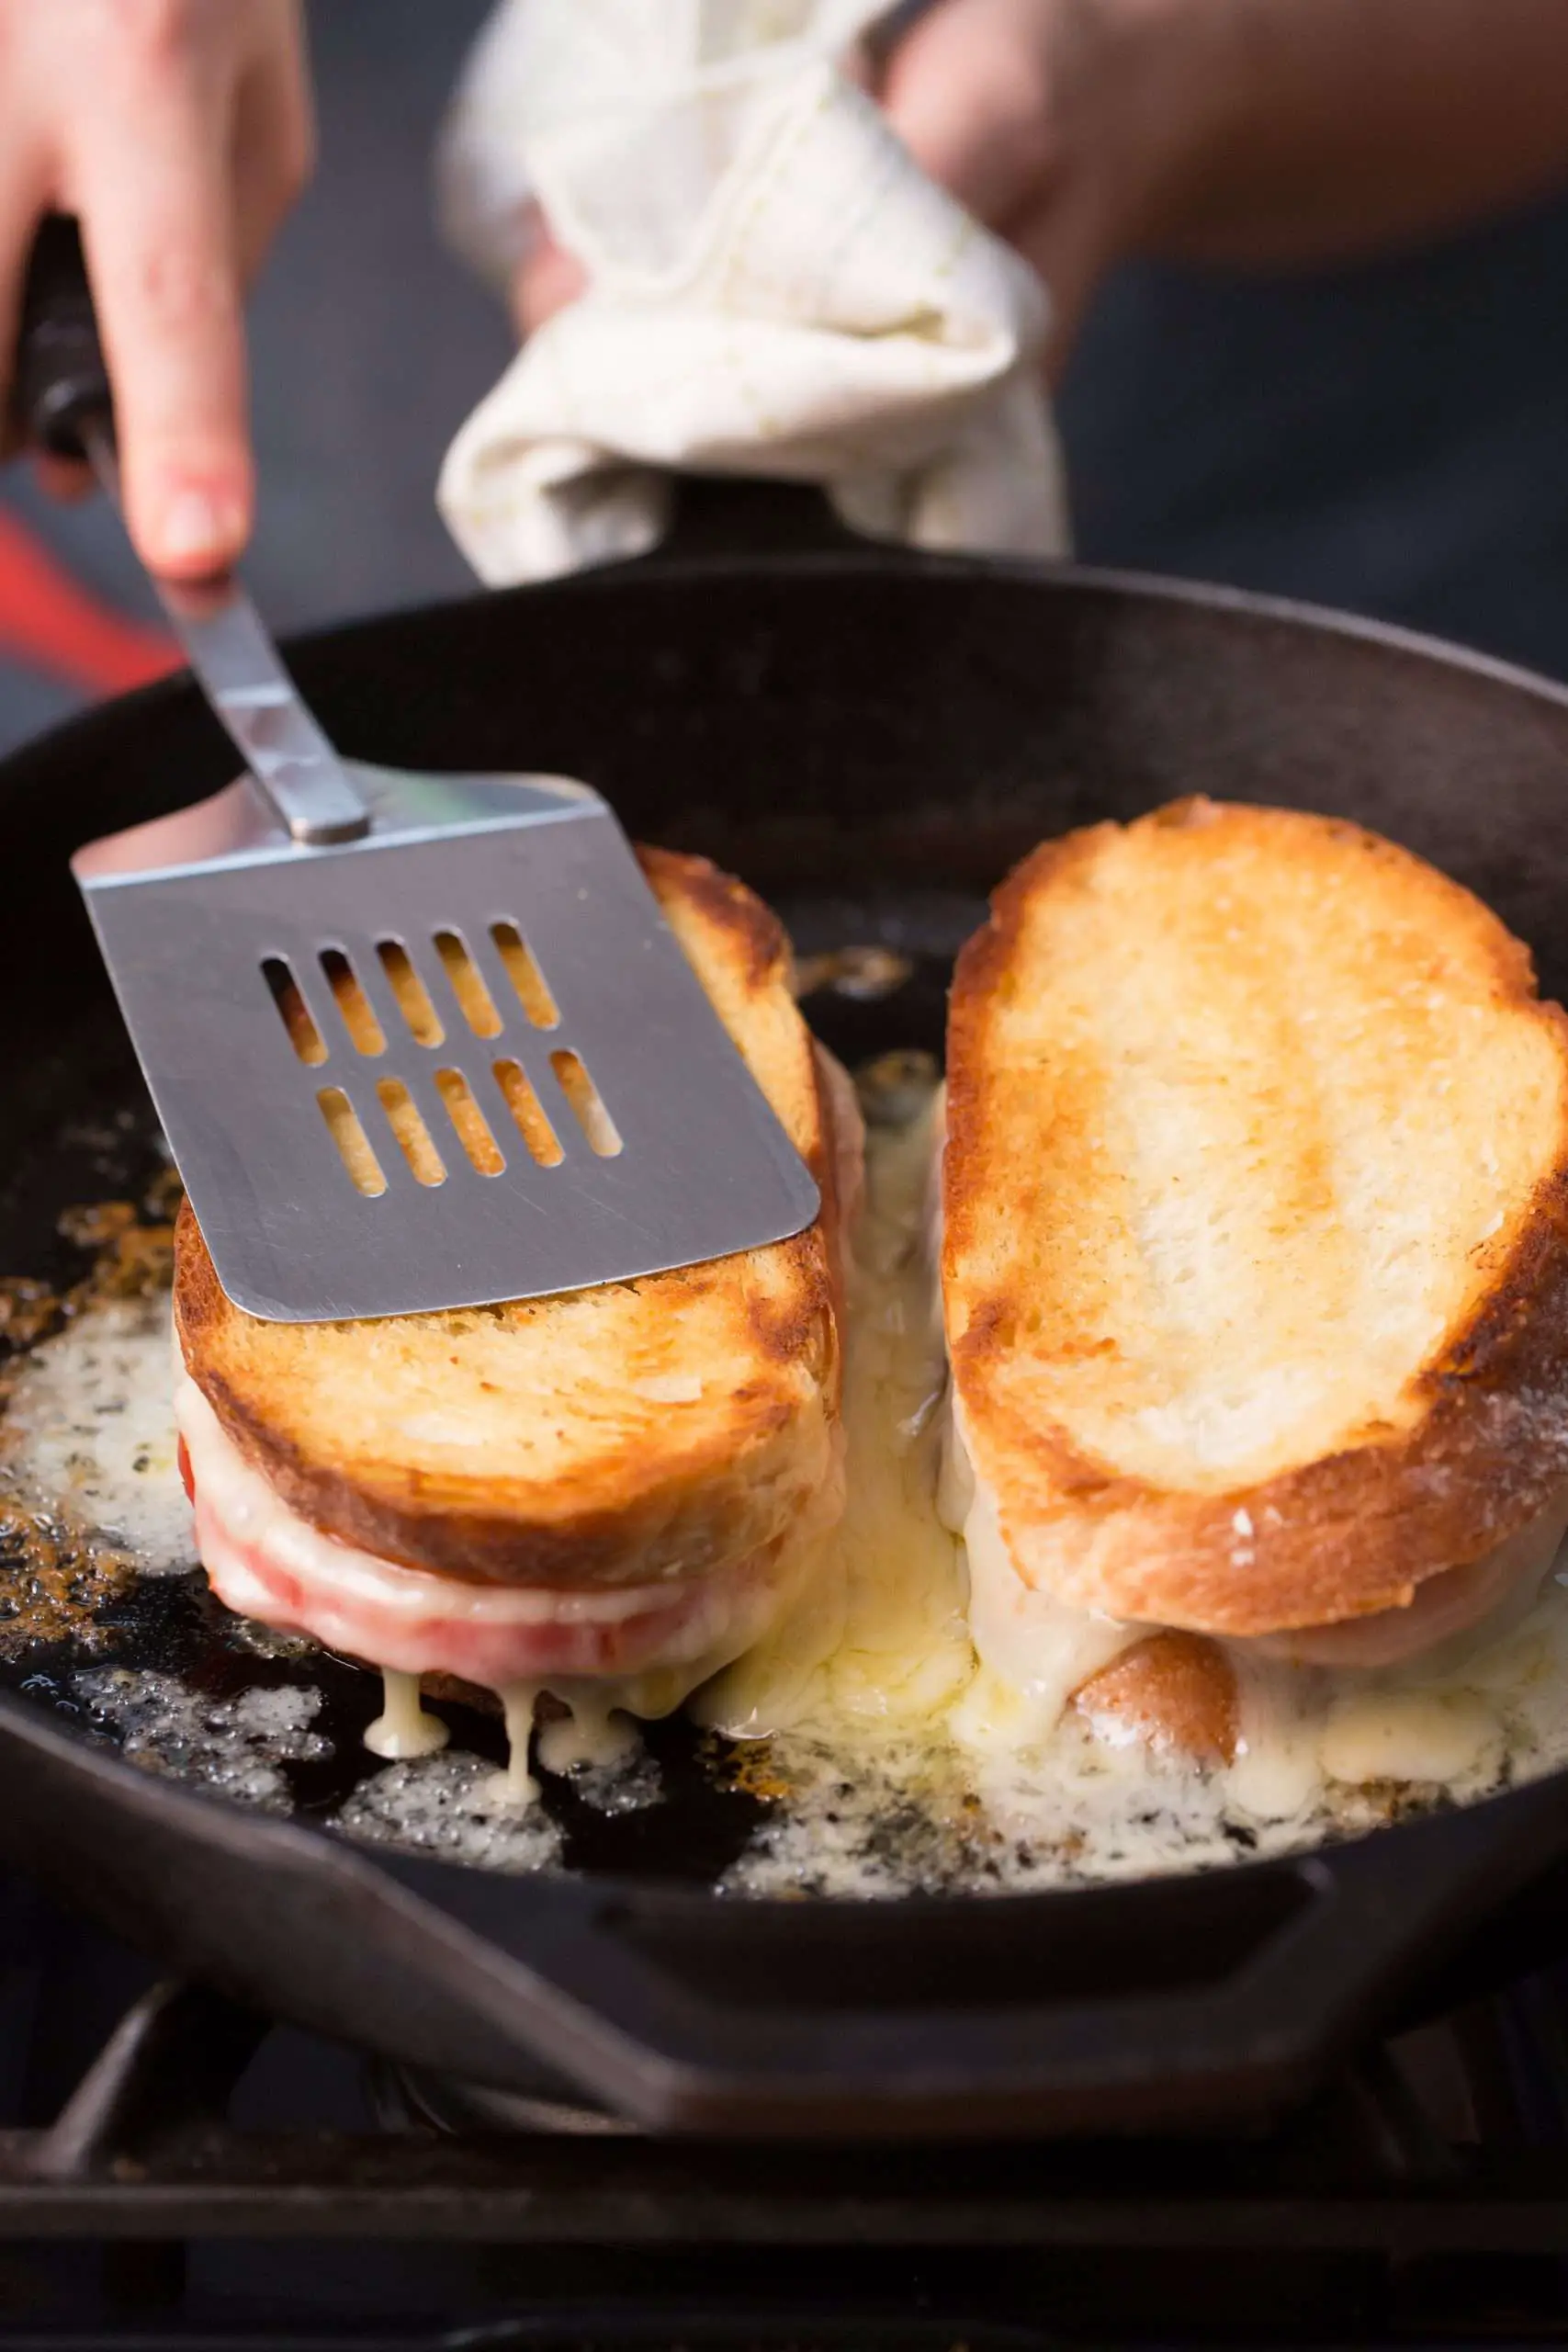 How To Make the Best Tomato Grilled Cheese Sandwich